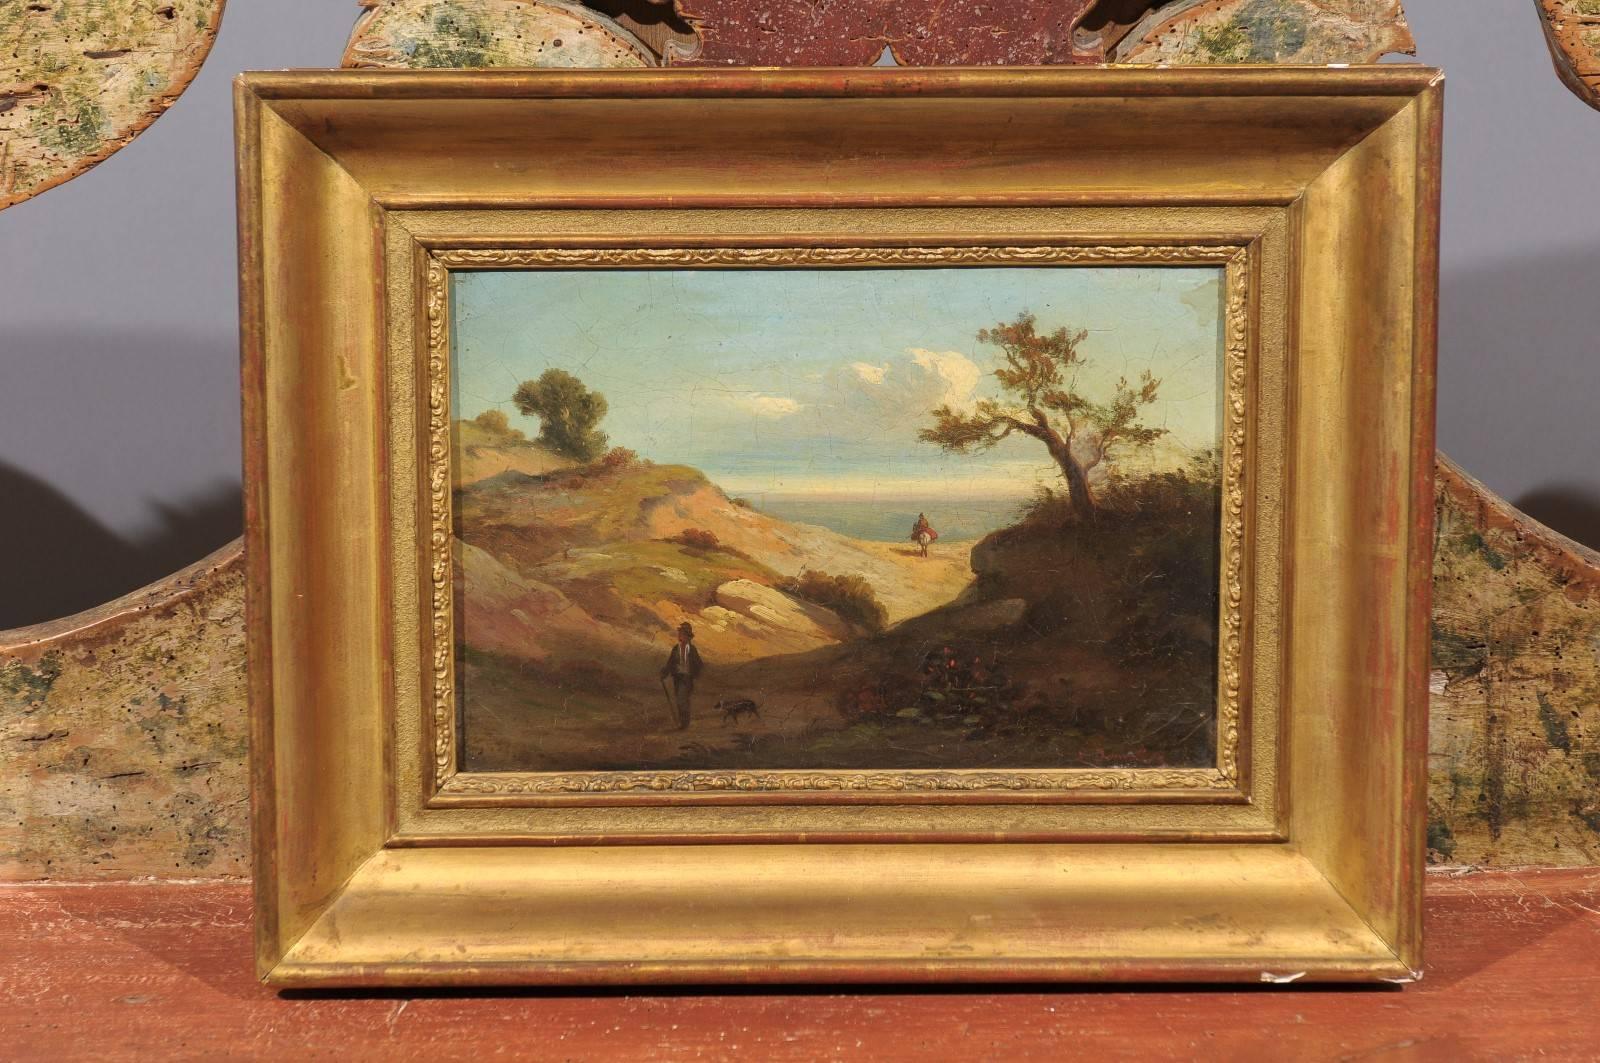 19th century Italian oil on canvas landscape painting in giltwood frame.